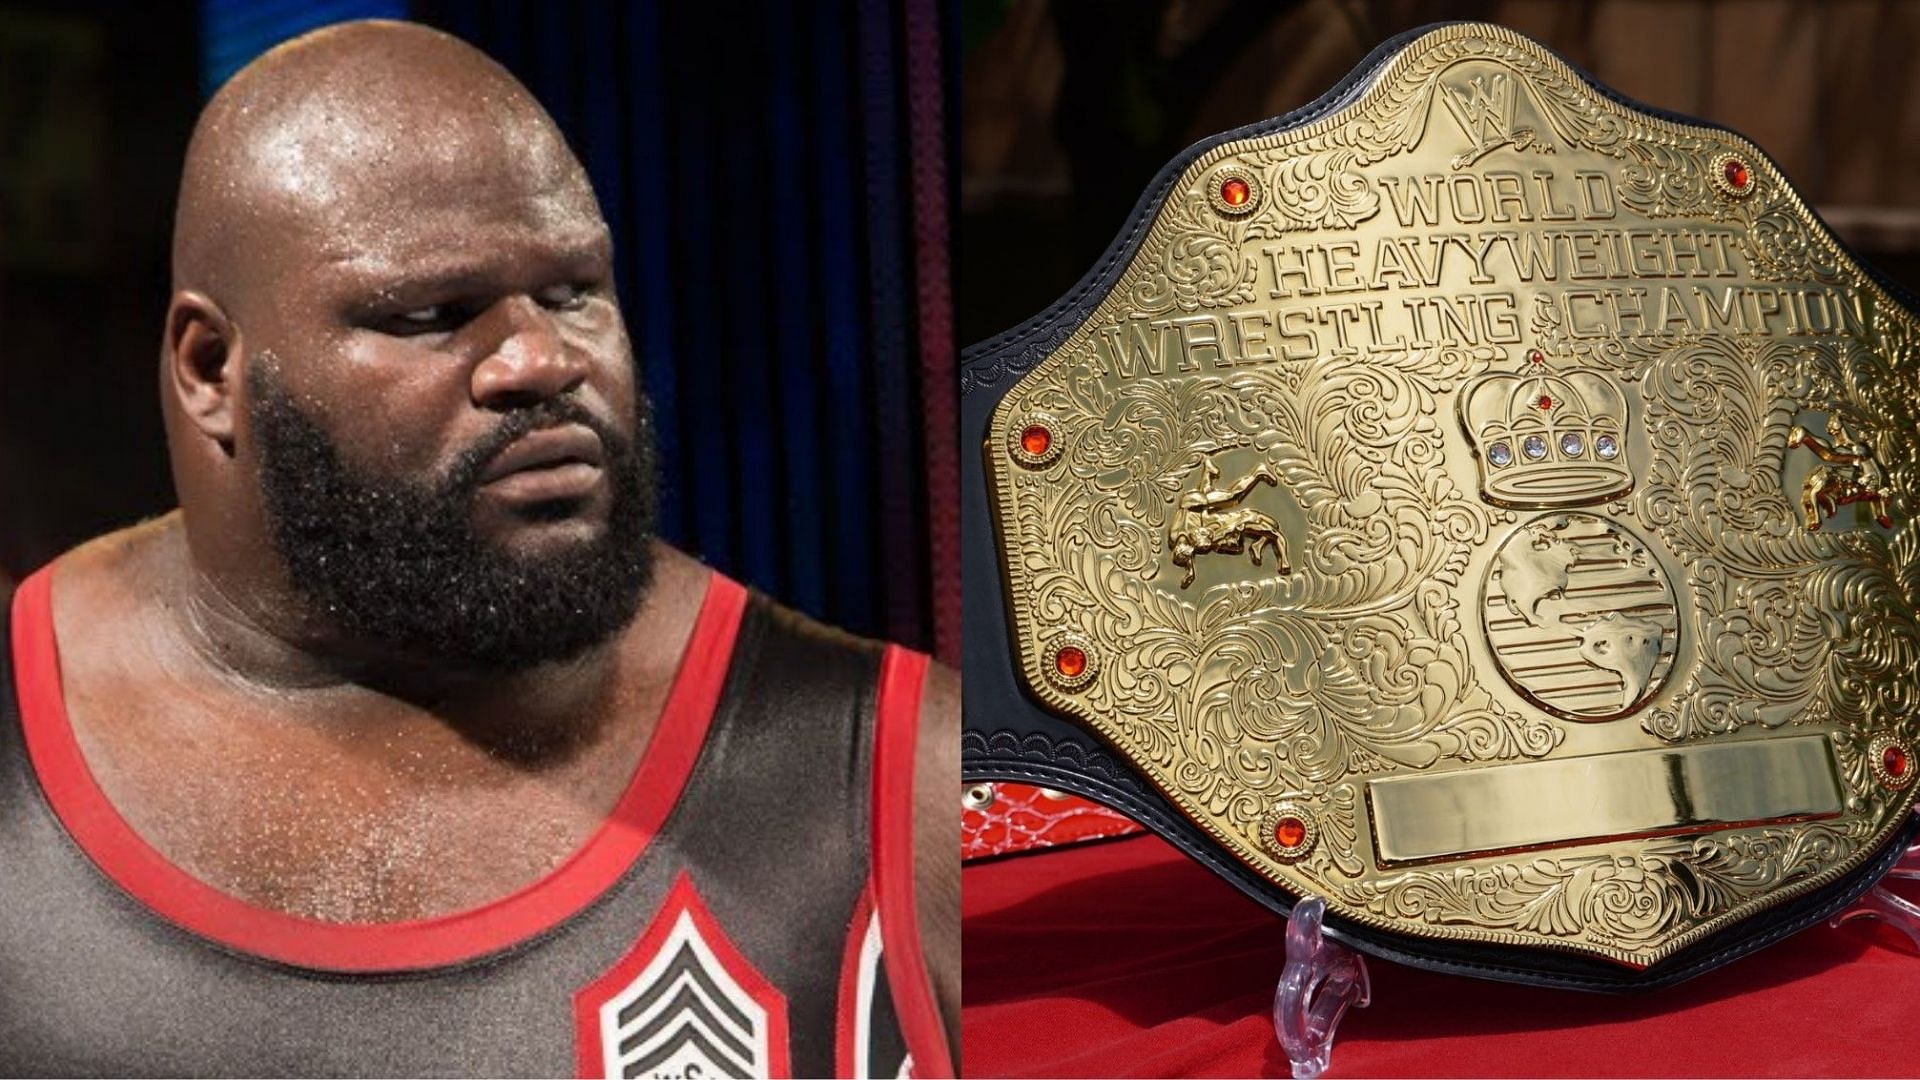 Mark Henry is a former WWE World Champion!